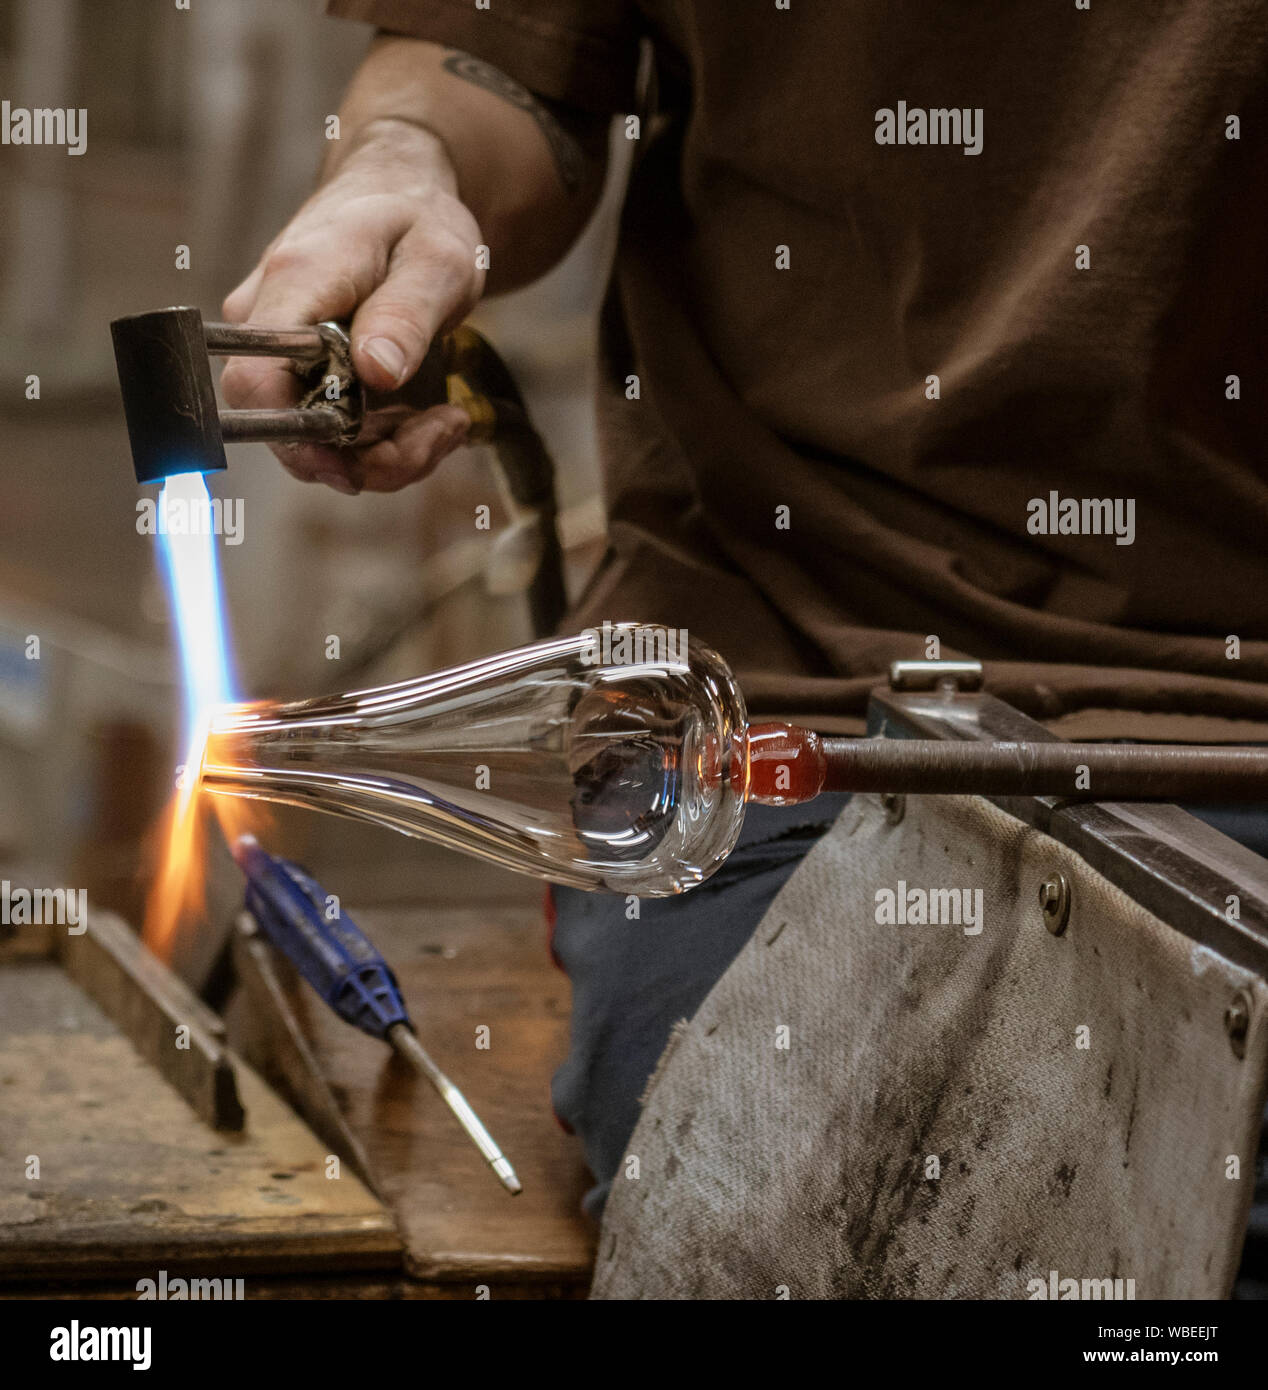 A glass blowing artist forms a blob of glass into a vessel using a